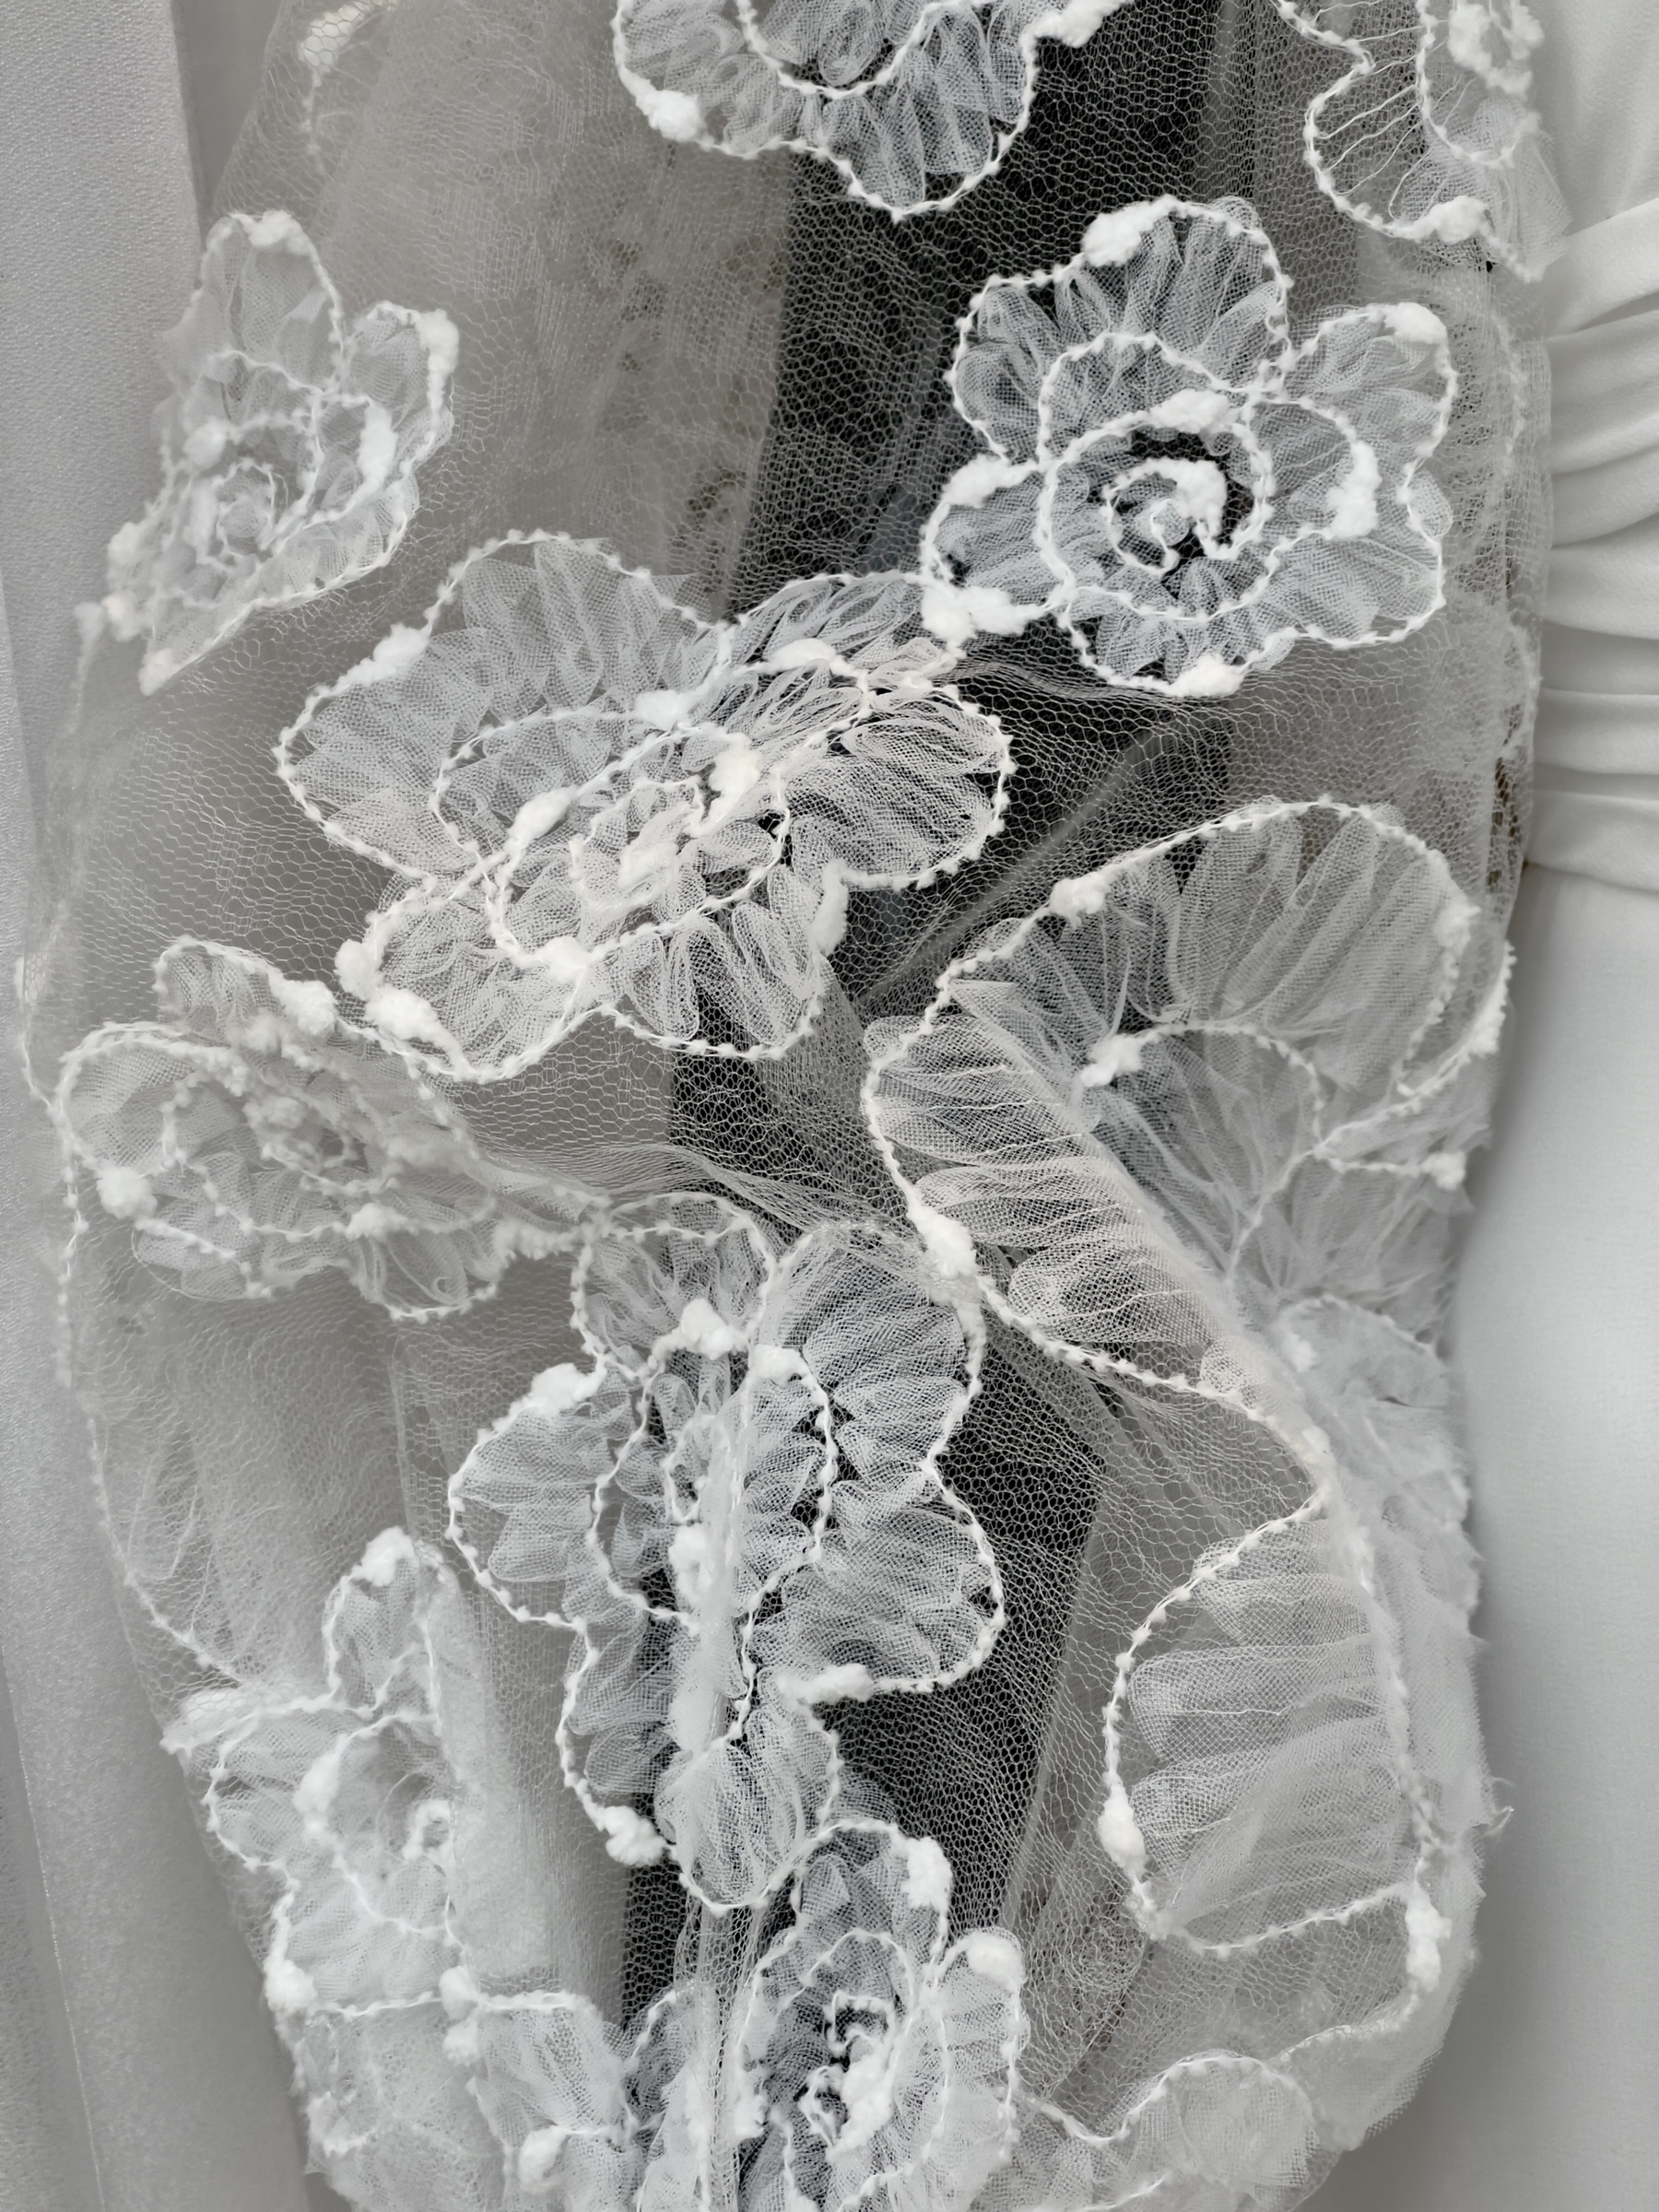 Lace poppy like flowers on sleeve of white wedding gown. Monochrome.